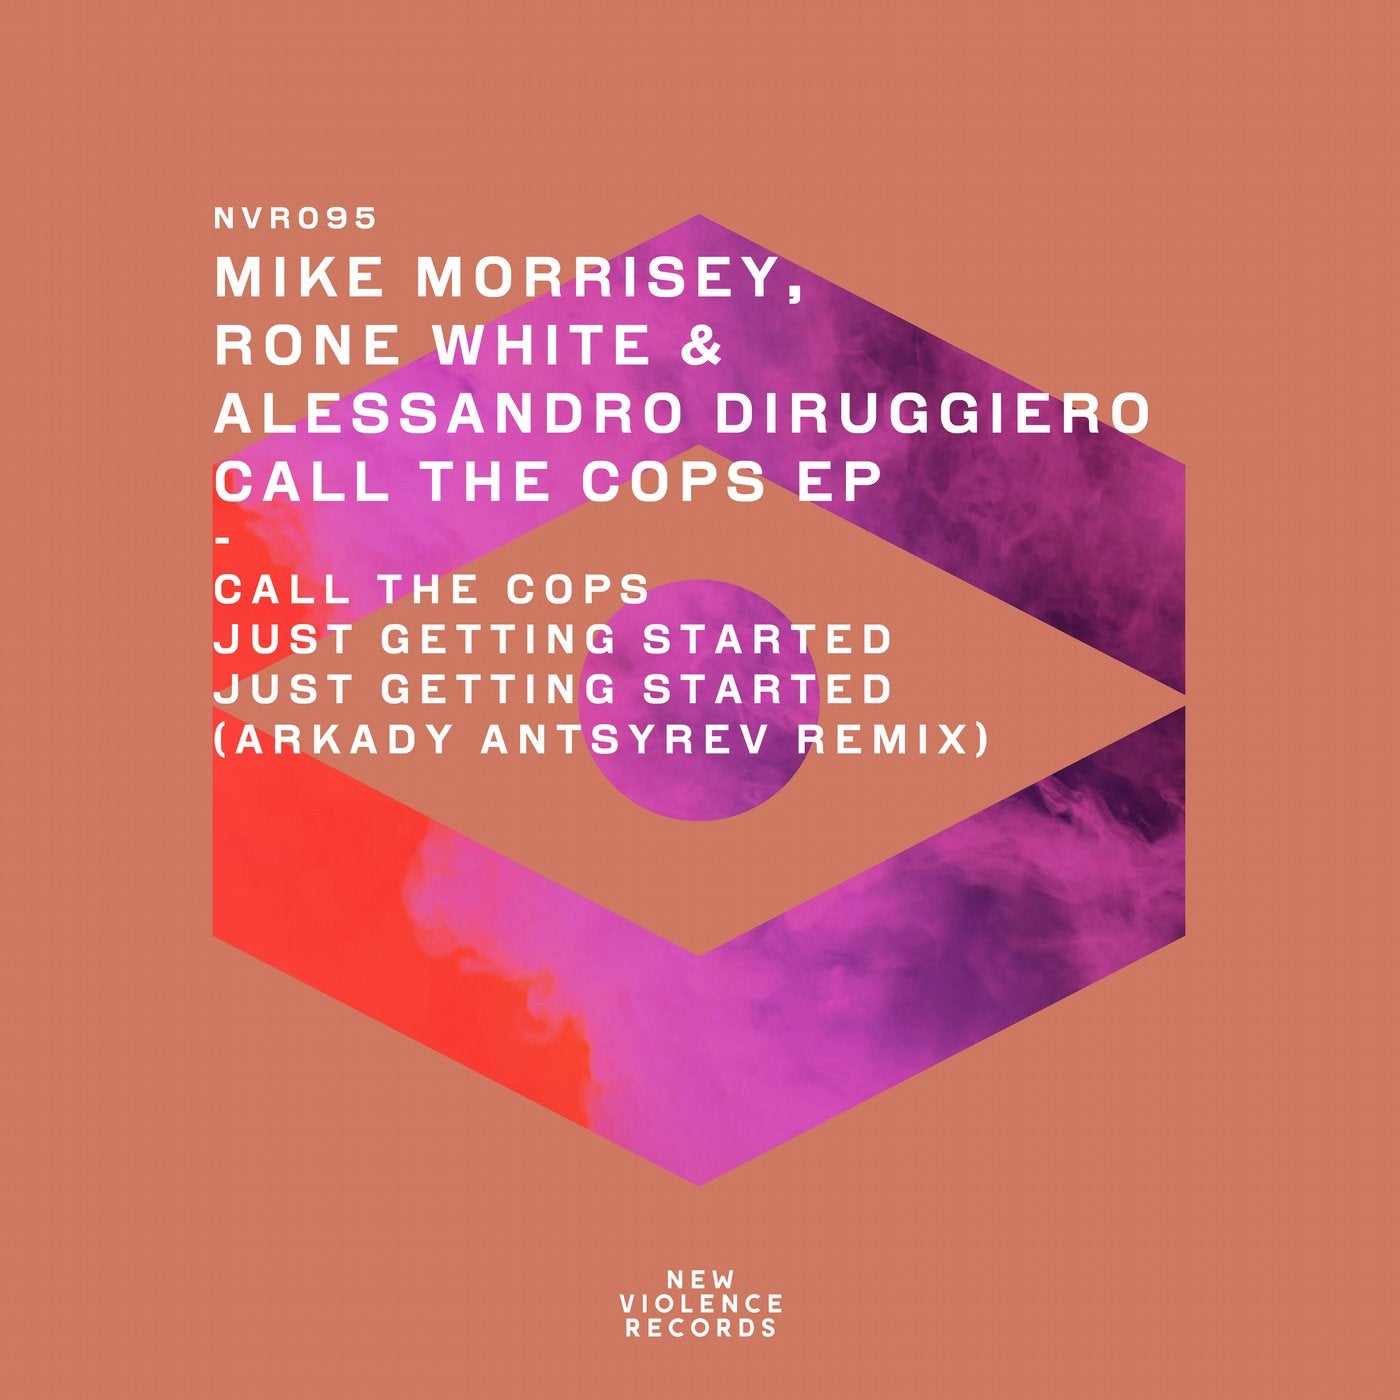 Call The Cops EP